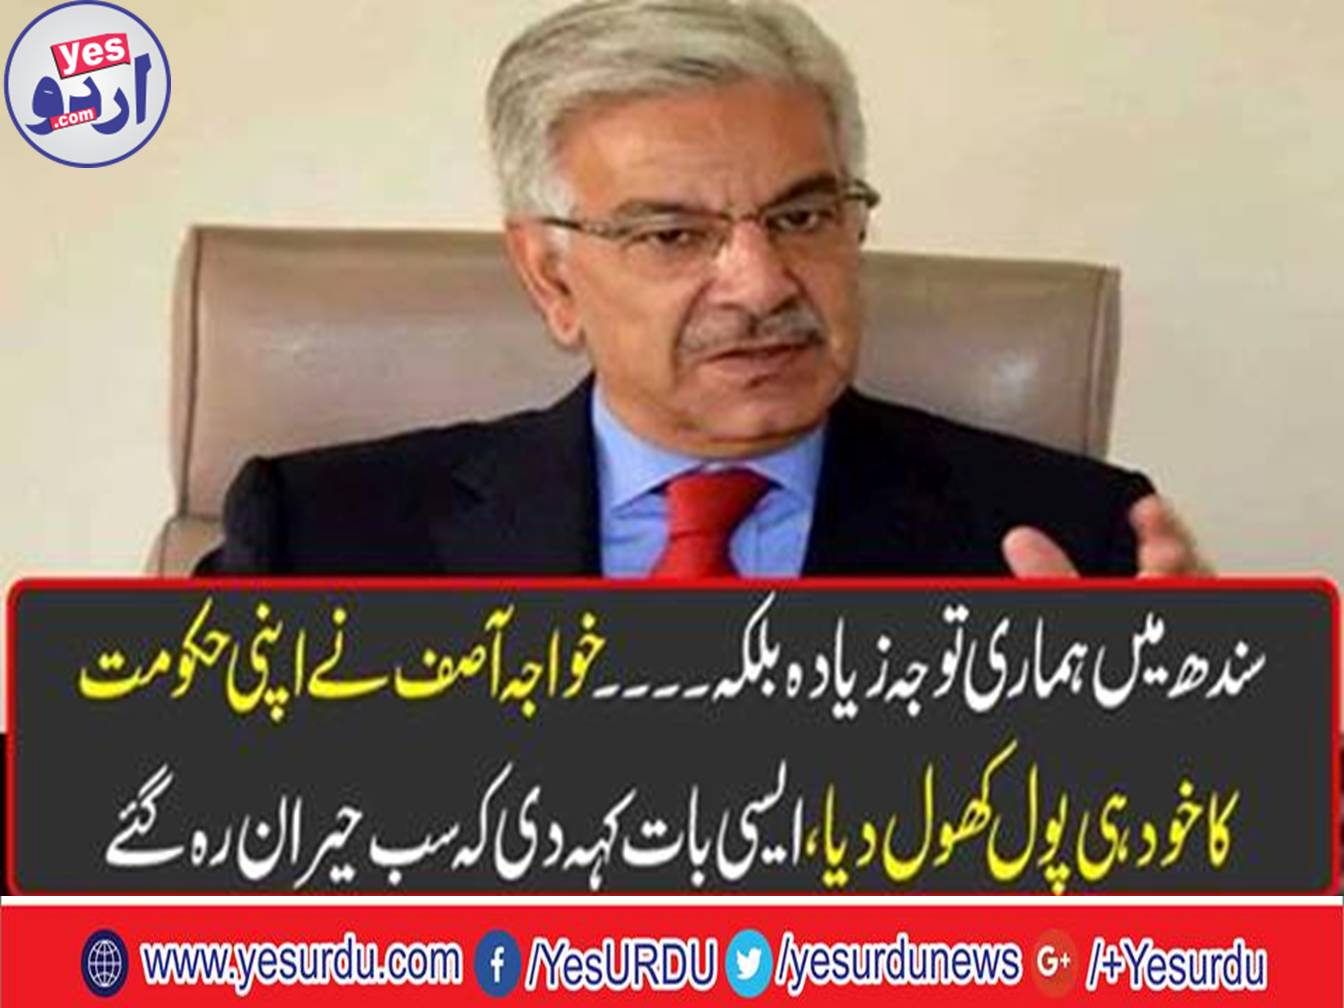 We have the laziness do not pay attention to Karachi and Indo-Sindh, PML-N senior leader and former Foreign Minister Khawaja Asif